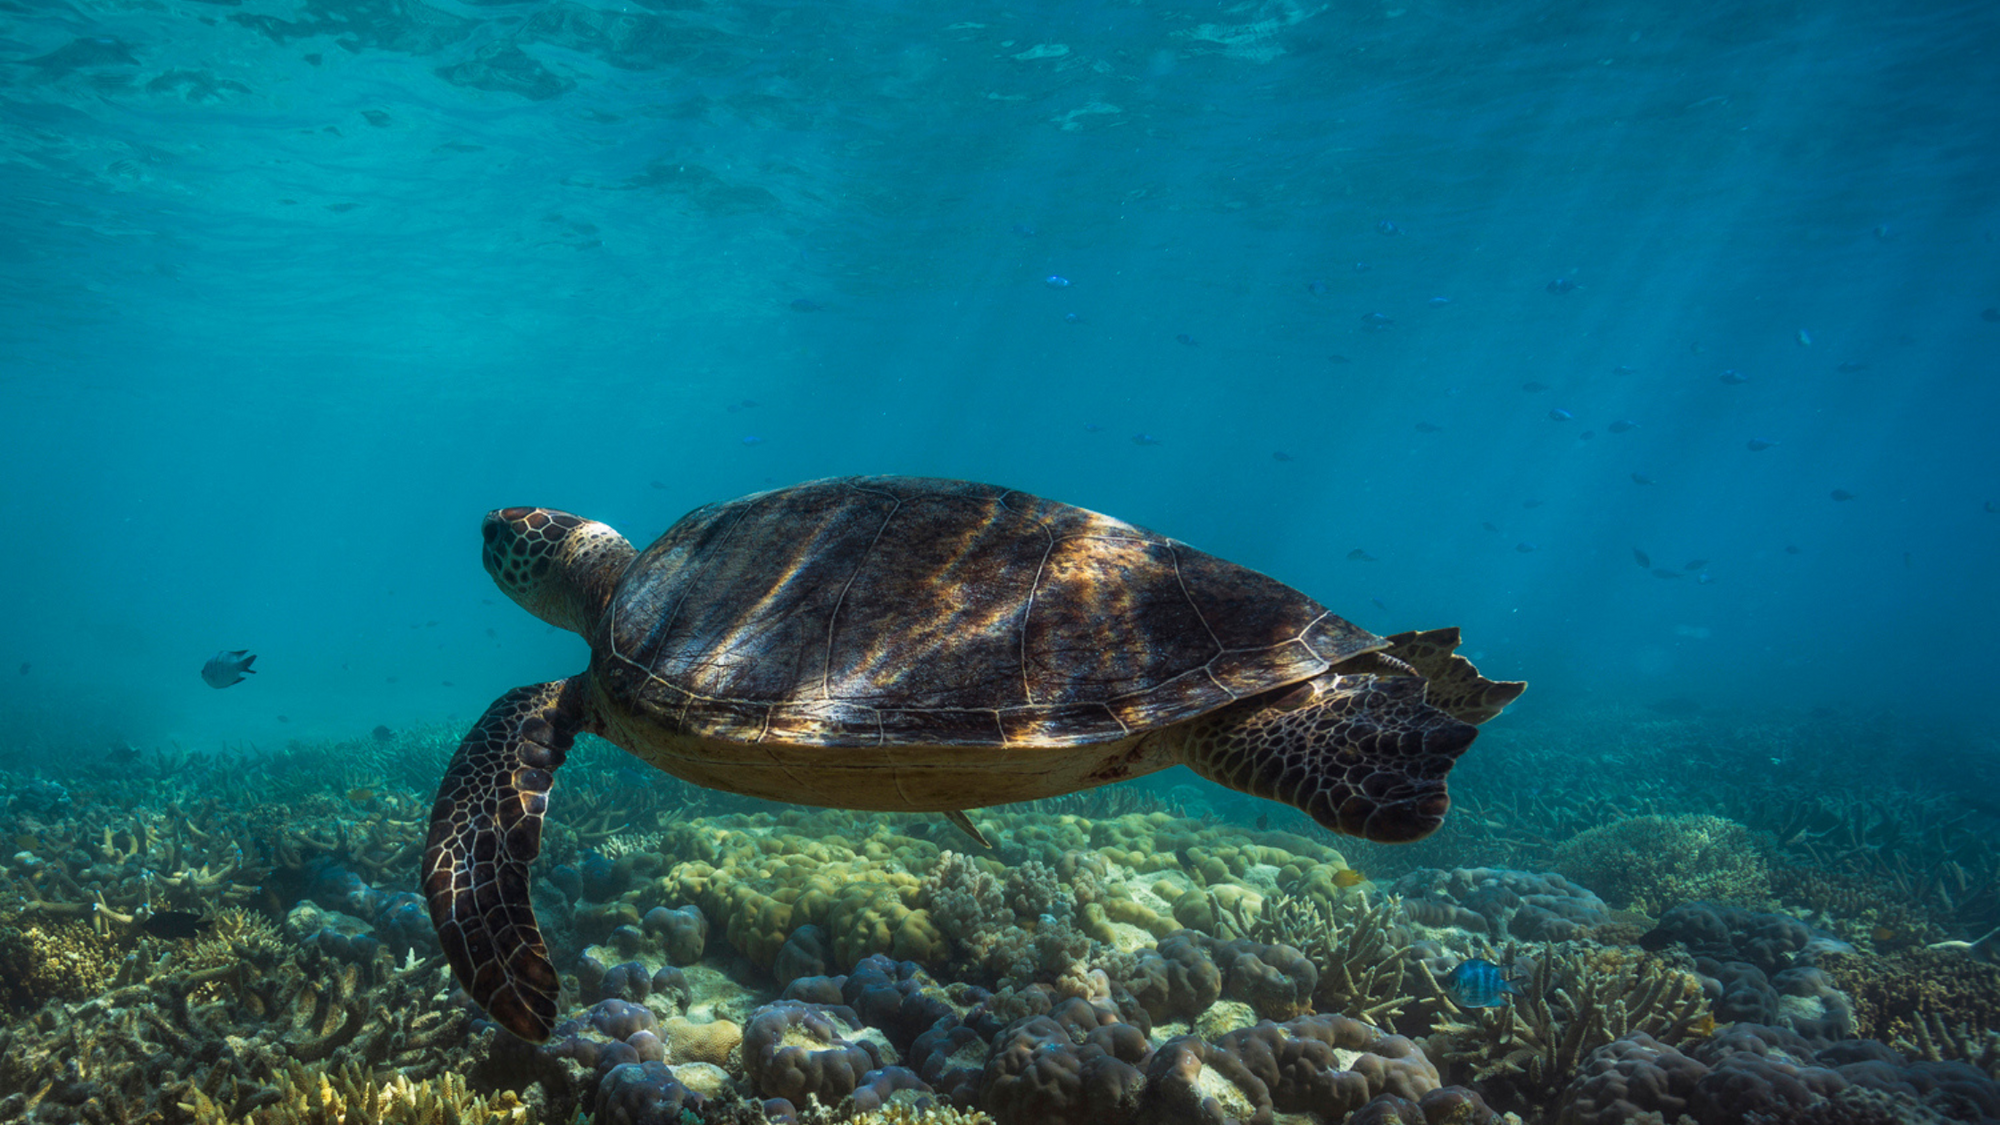 The Green Sea Turtle of The Great Barrier Reef